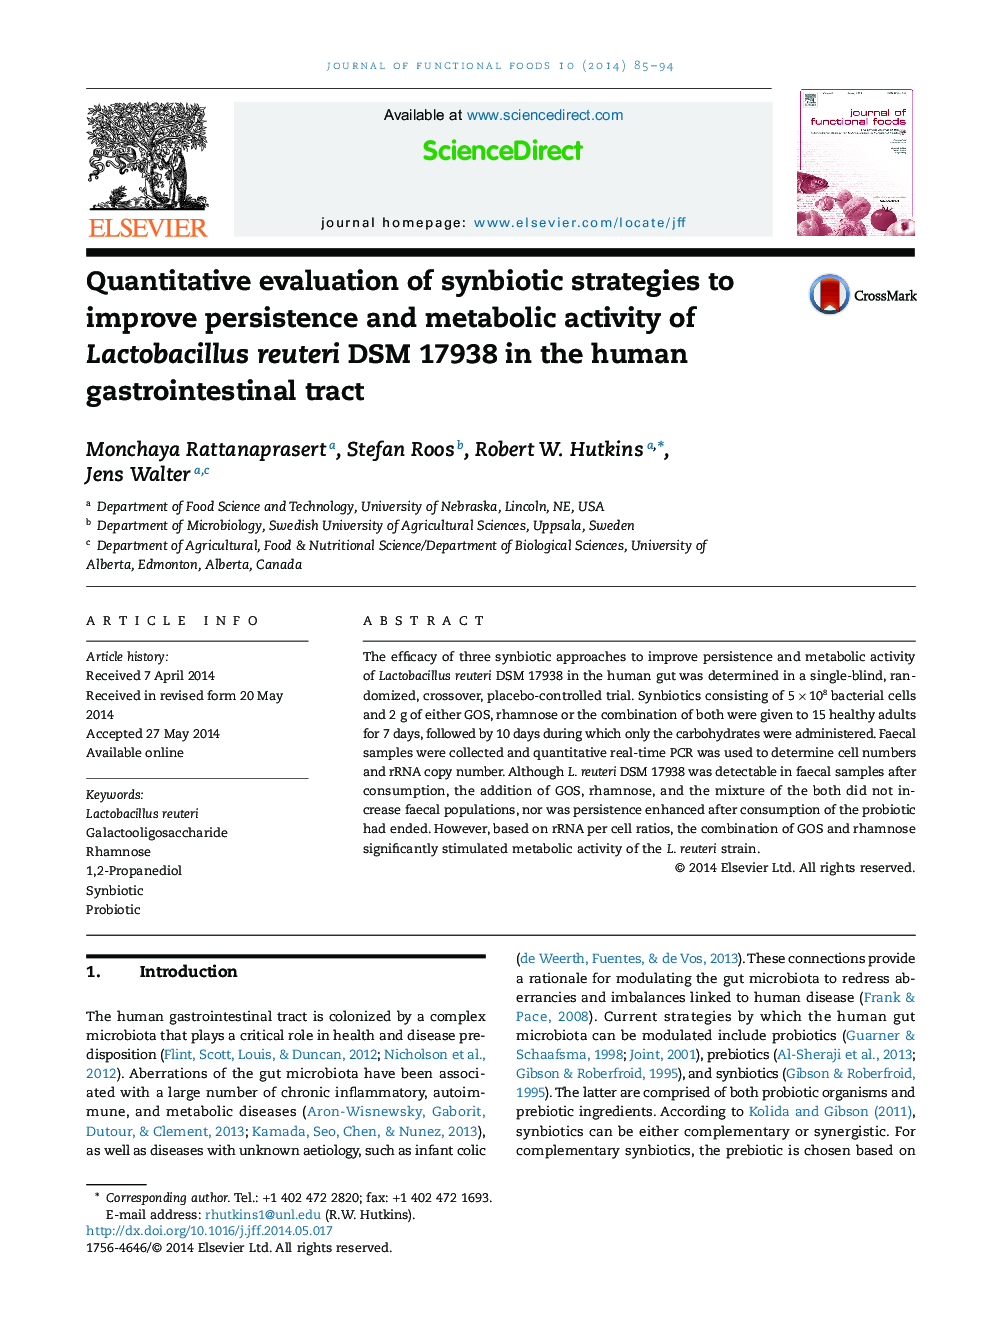 Quantitative evaluation of synbiotic strategies to improve persistence and metabolic activity of Lactobacillus reuteri DSM 17938 in the human gastrointestinal tract